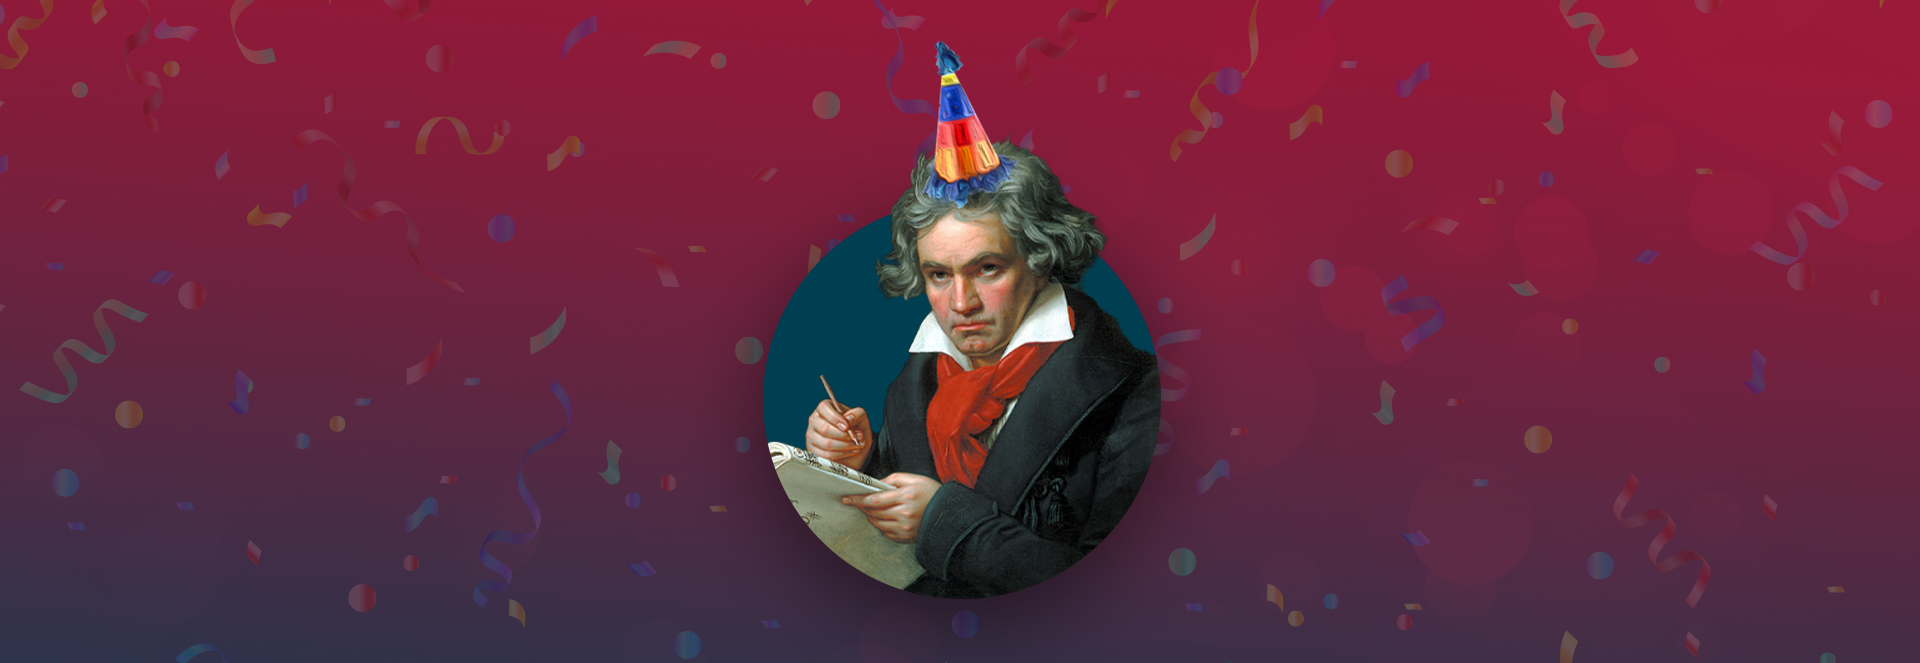 An image of Beethoven as he looks up from writing music with a birthday hat on, surrounded by colorful confetti.